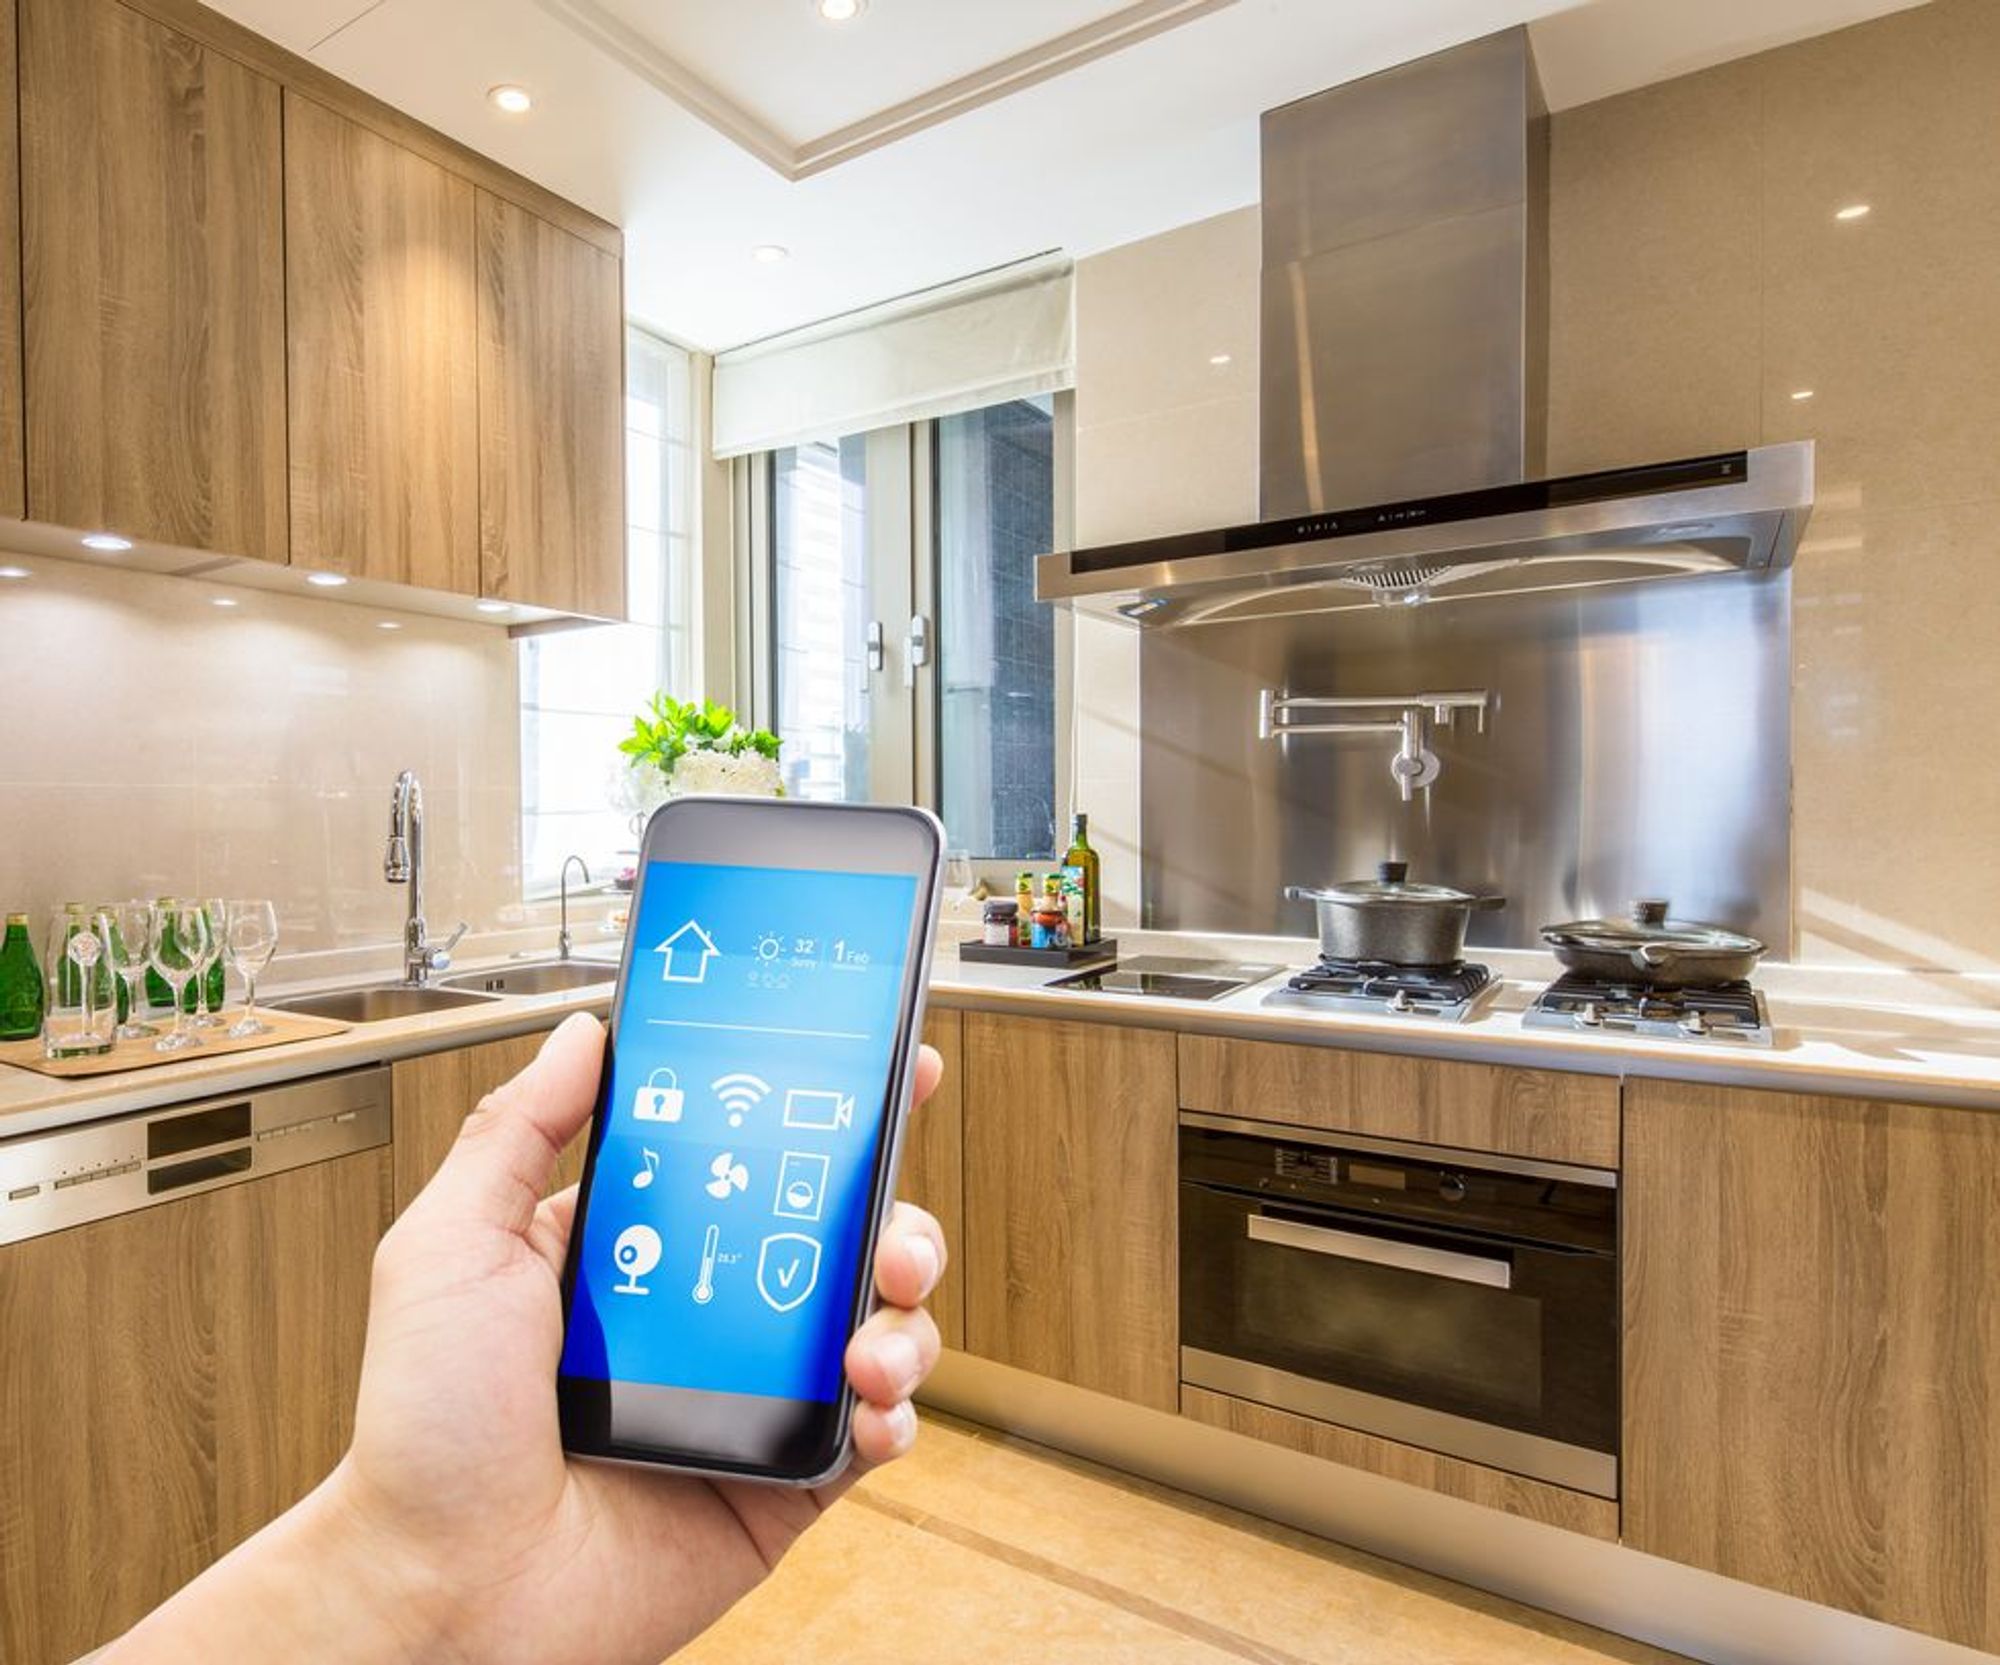 Smart and High-Tech Appliances to Make Your Kitchen More Efficient